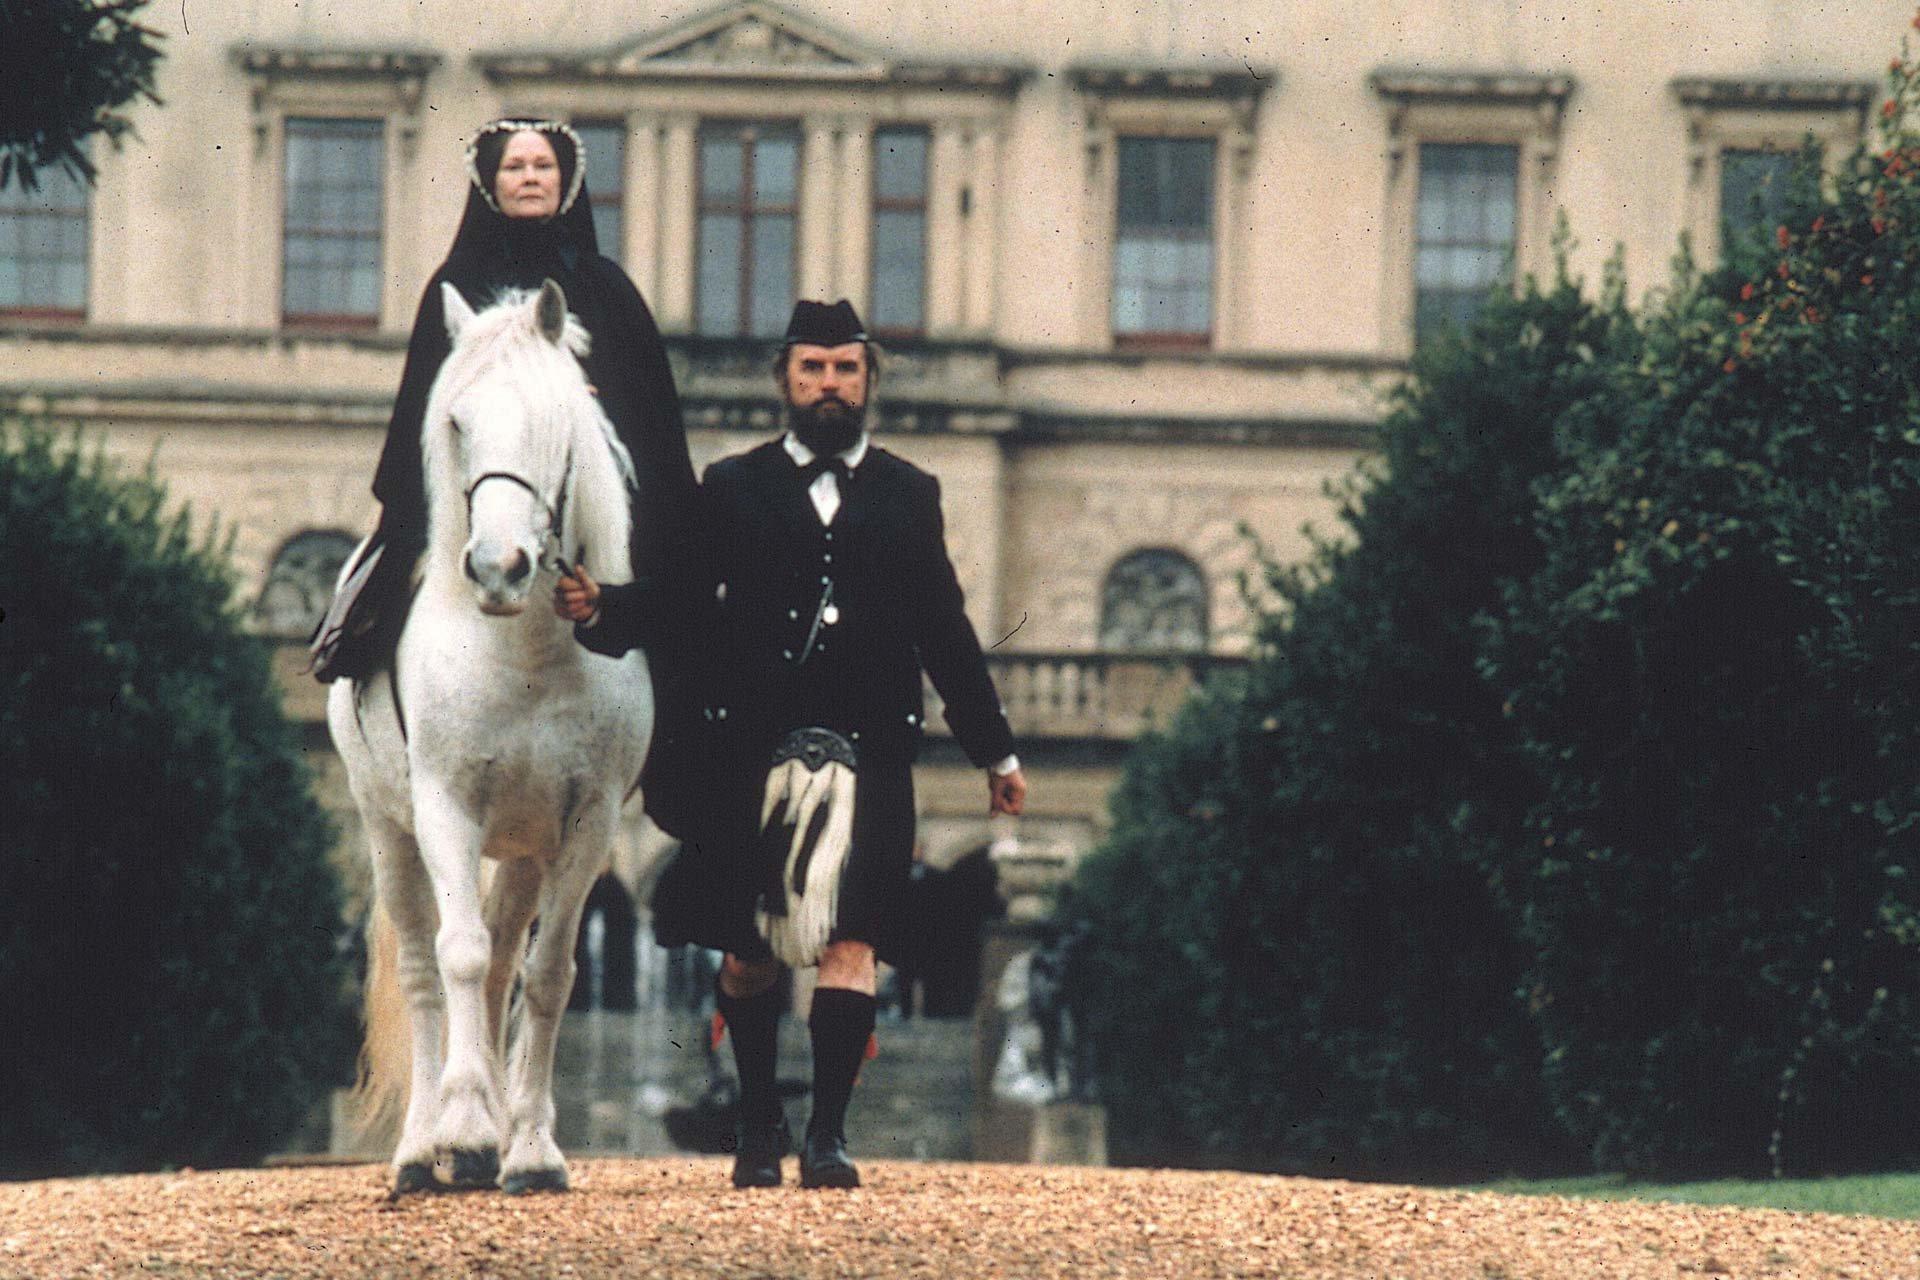 Judi Dench and Billy Connolly in Mrs Brown. Duns Castle stands in for both Balmoral Castle in Aberdeenshire and Berkshire’s Windsor Castle in this 1997 period drama. Cockburnspath and Manderston also feature.